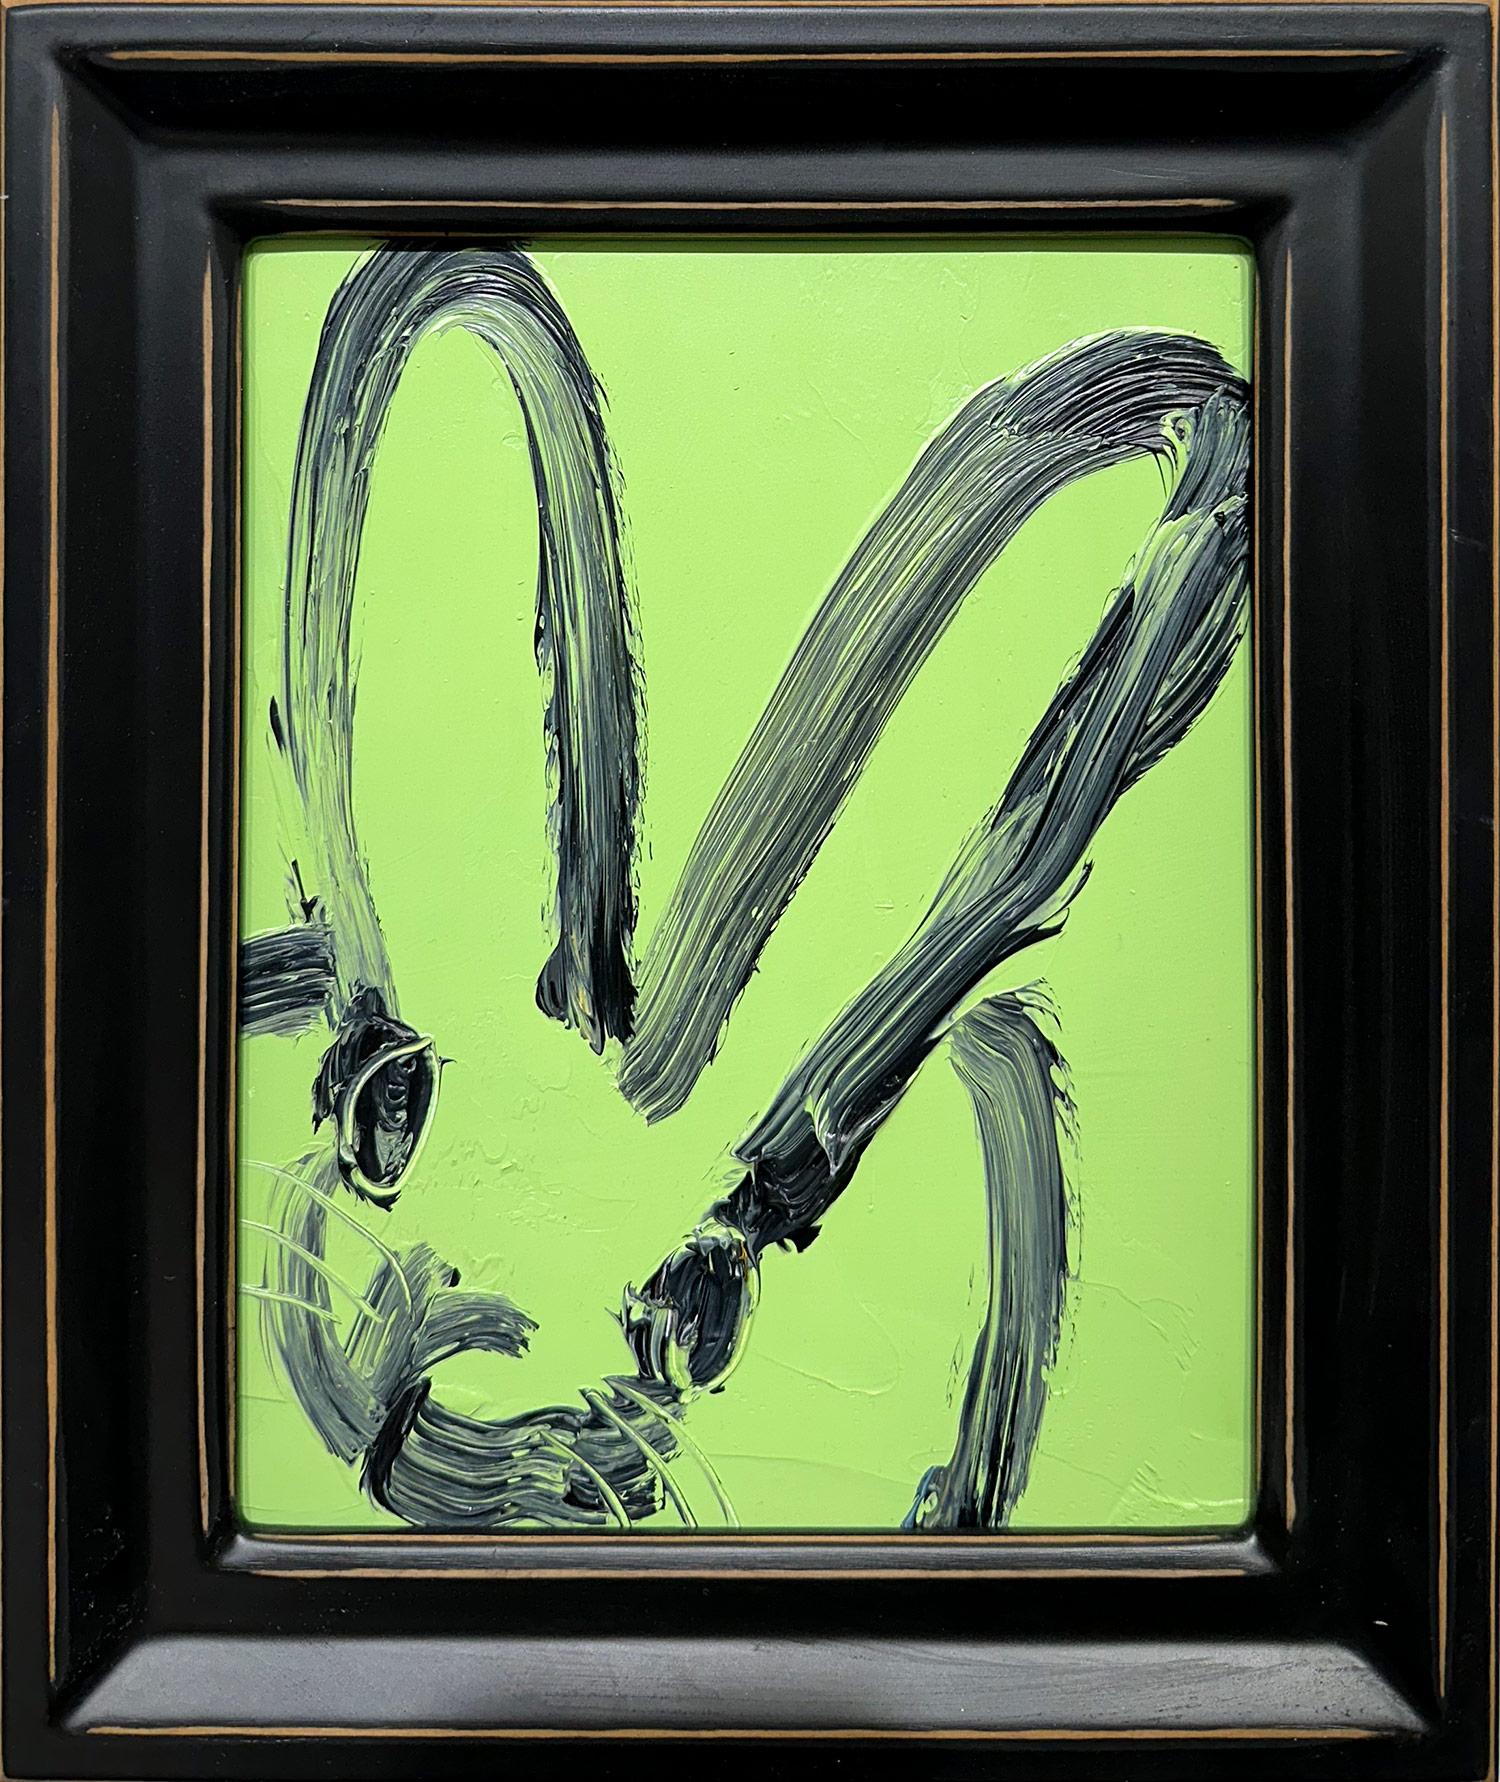 Hunt Slonem Abstract Painting - "Green Pastures" Black Outline Bunny on Mint Green Background Oil Painting Wood